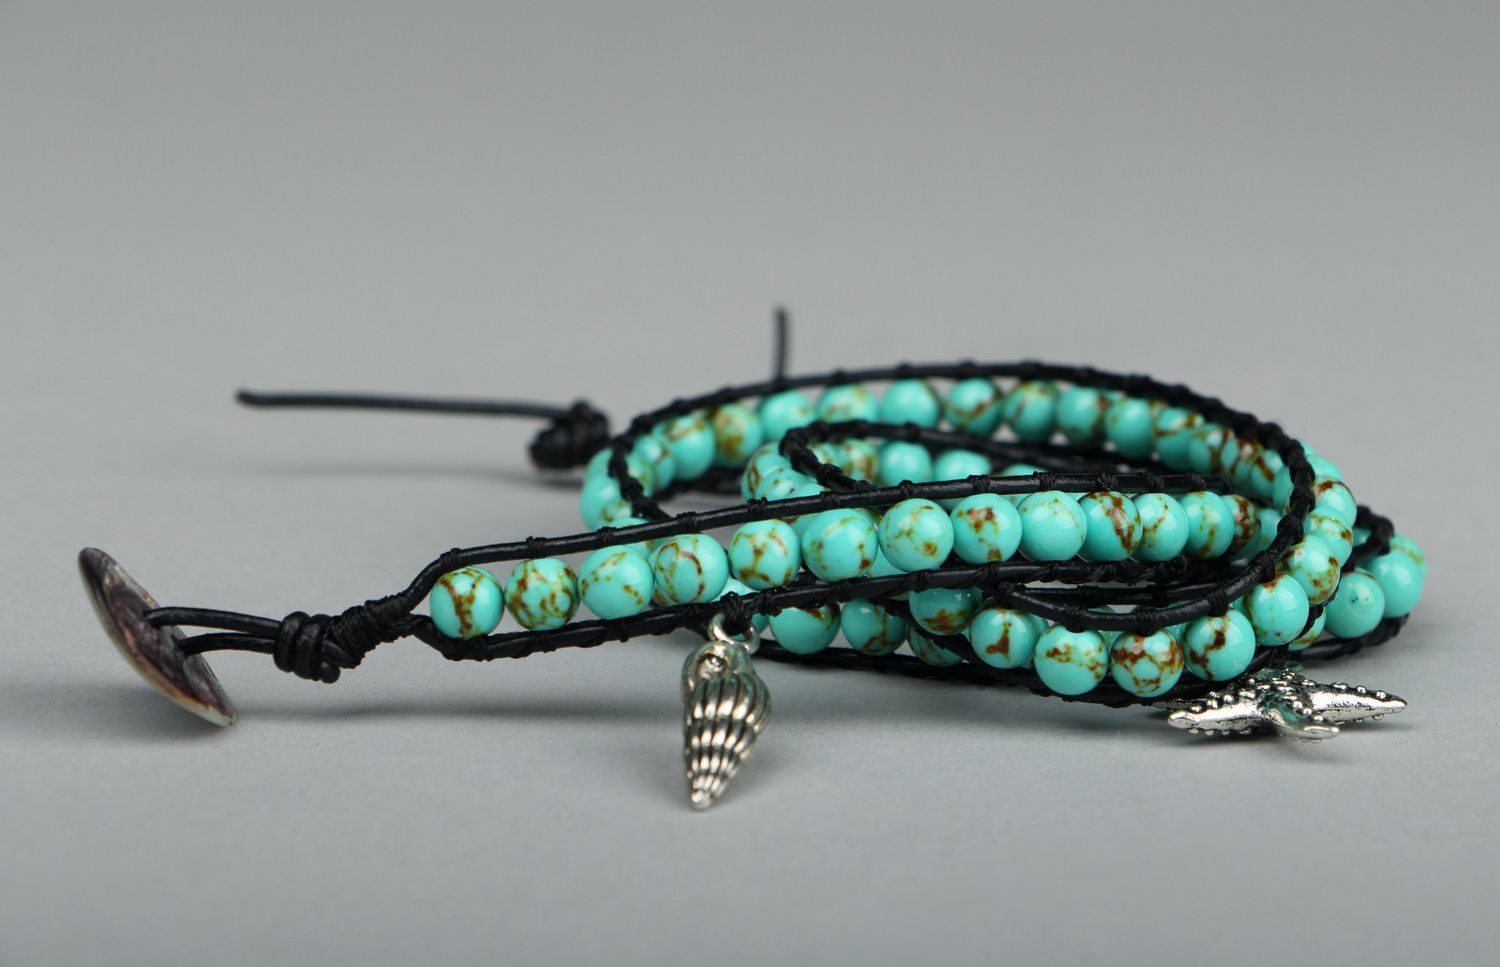 Bracelet made of turquoise stones and leather photo 1